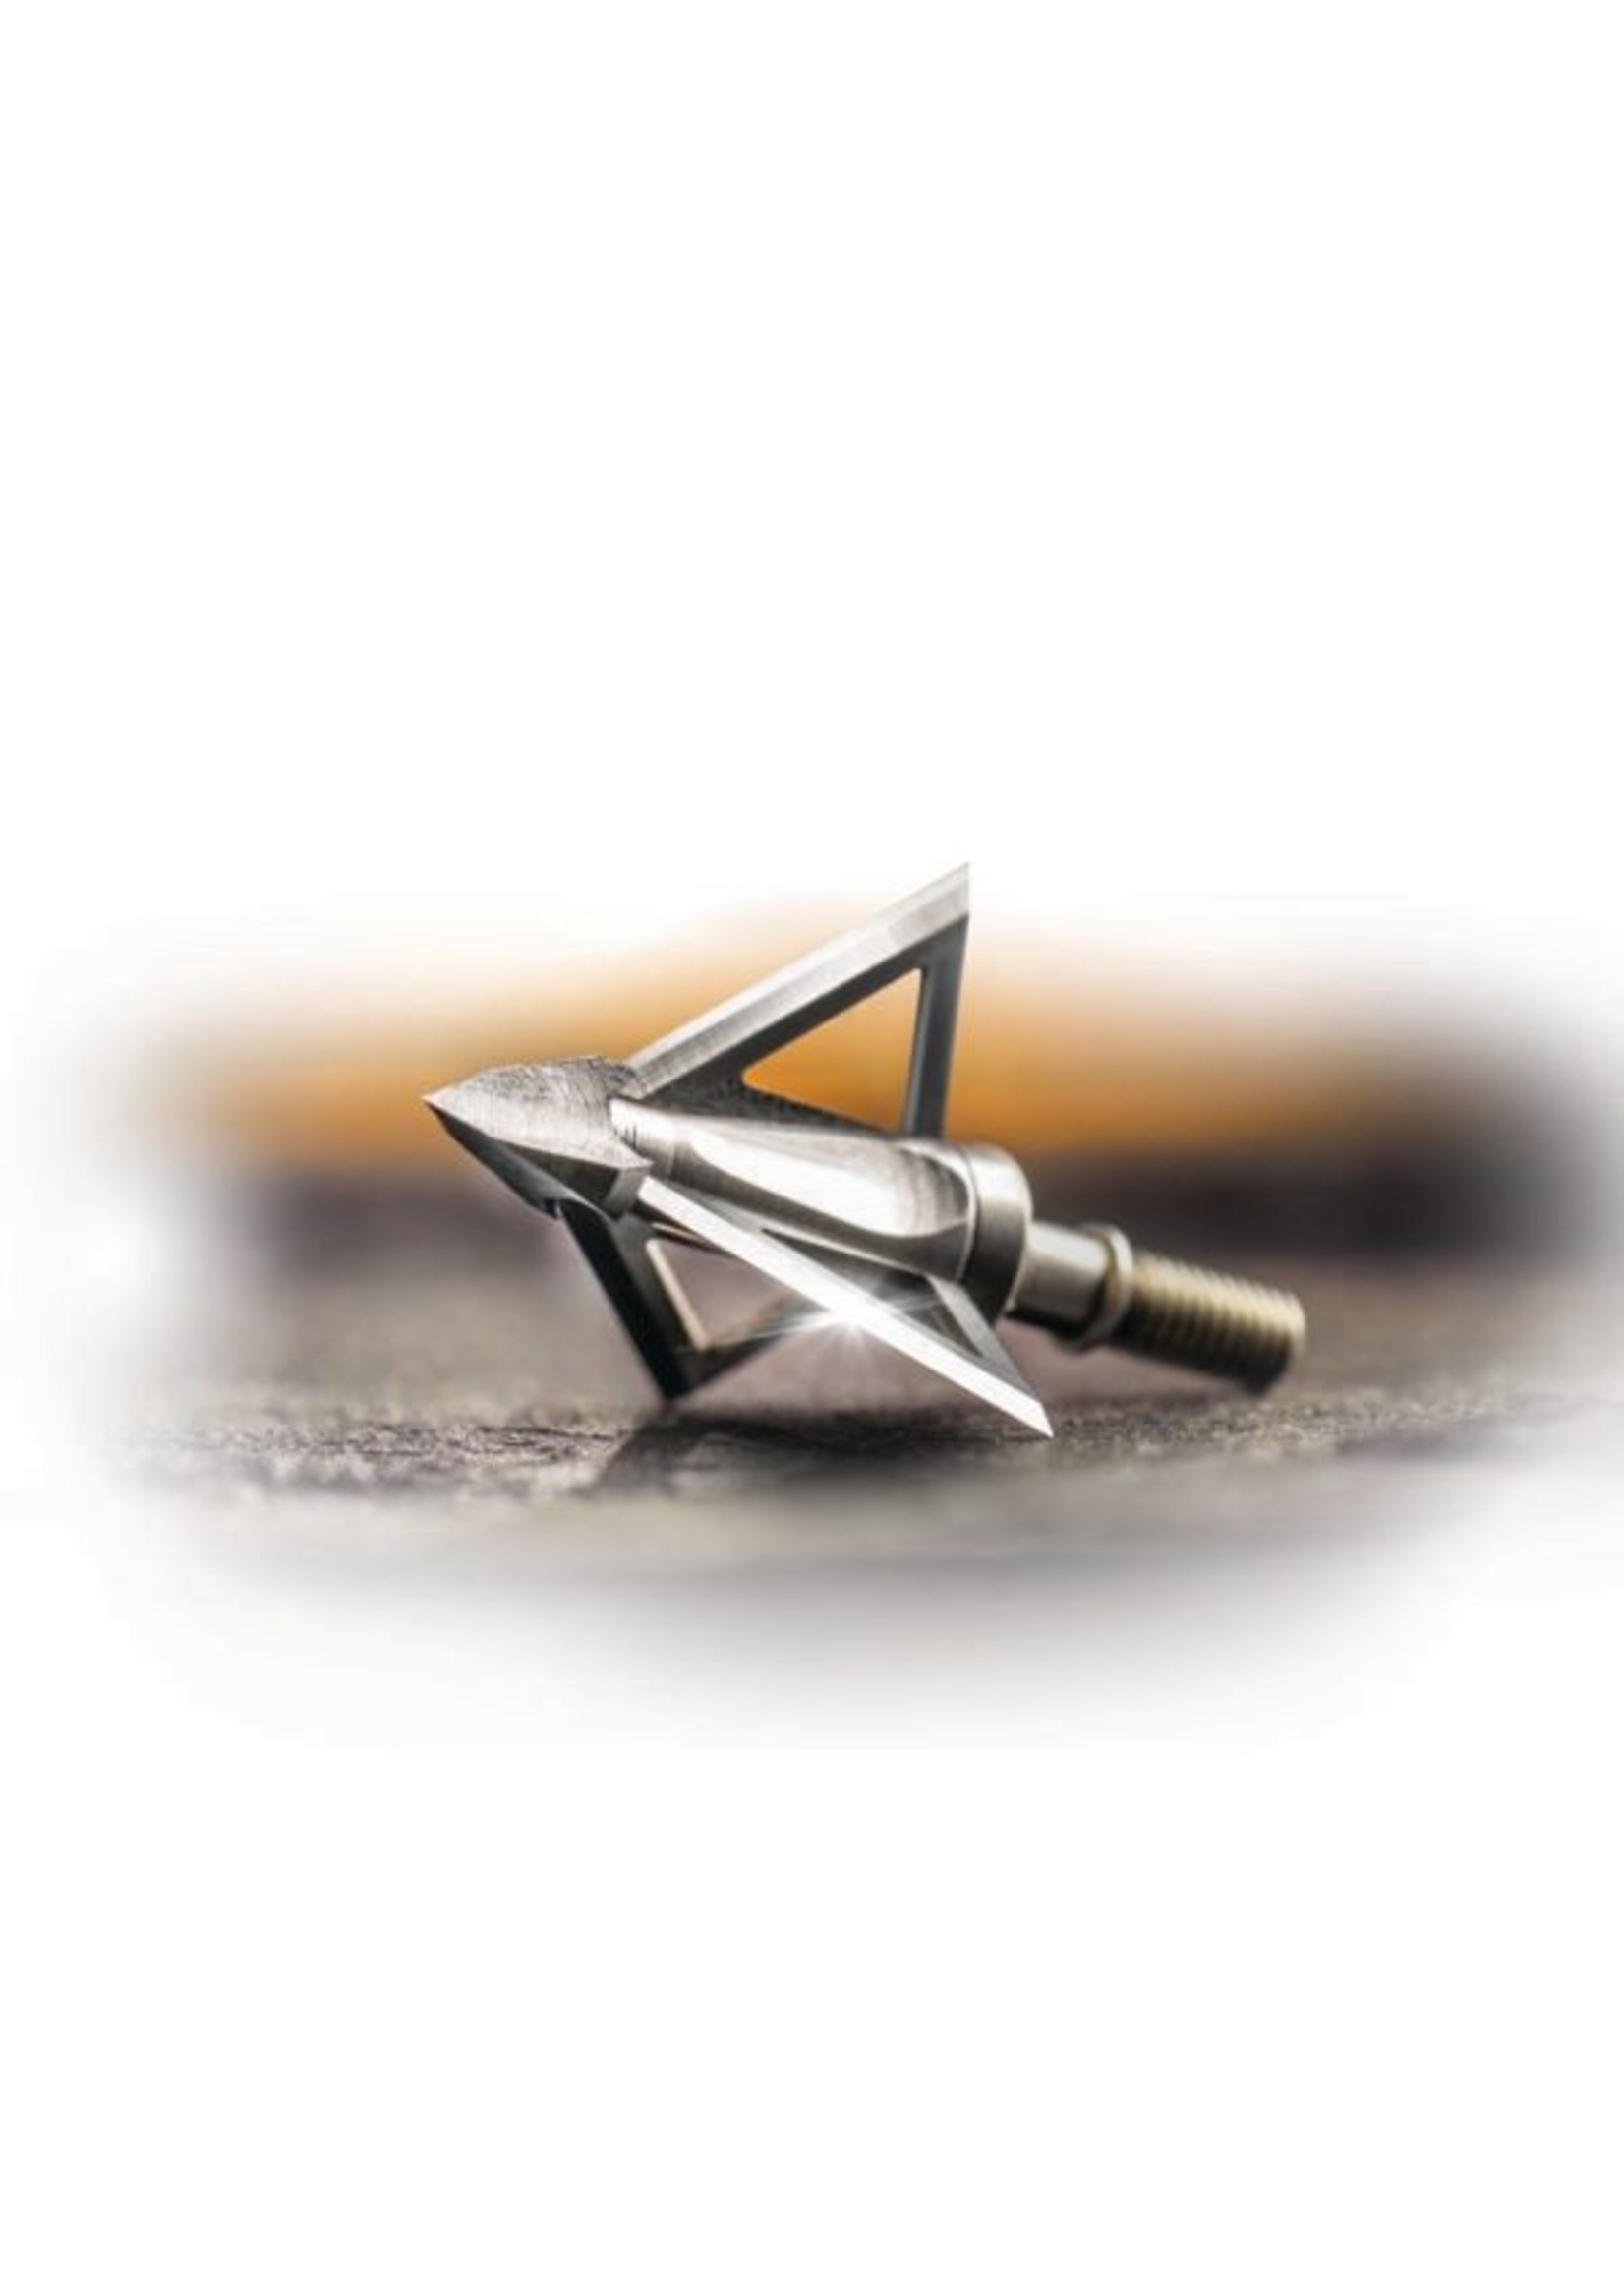 Wasp Mortem Fixed Blade Broadhead 1 1/8" .032" Stainless  Steel Blades,  100 grain - 3 pack